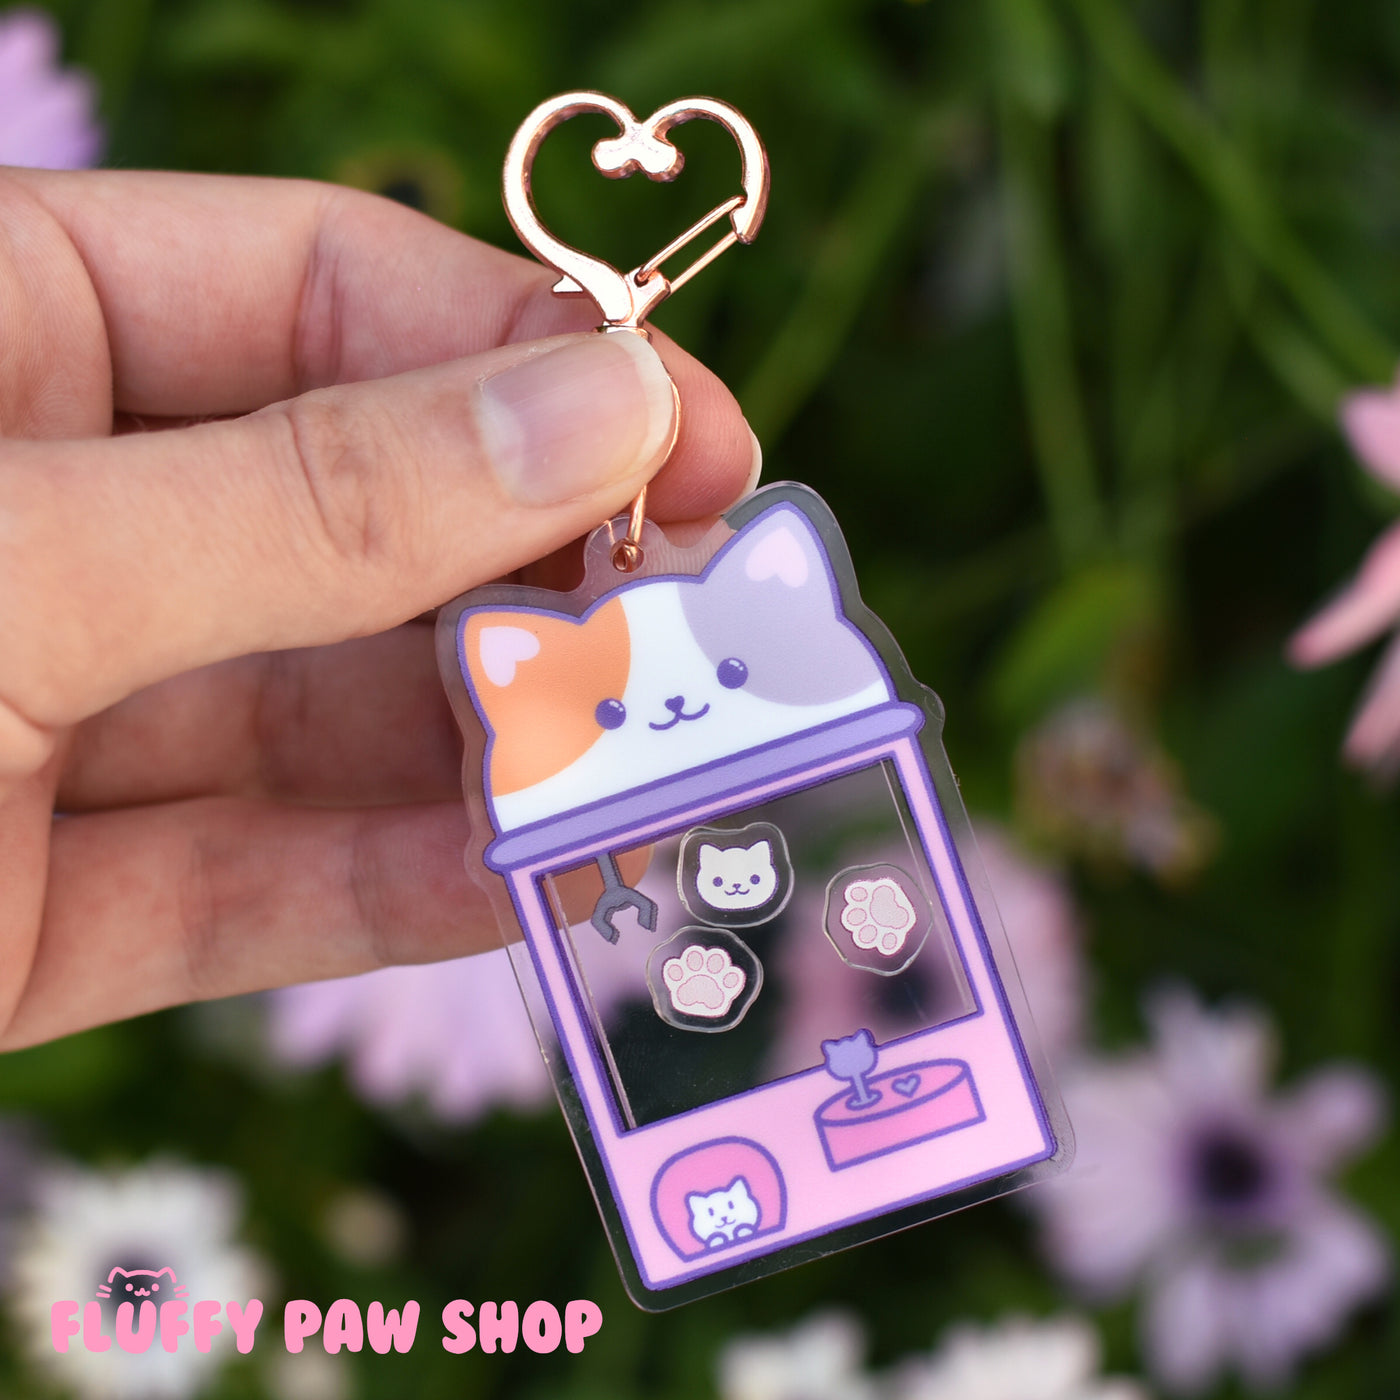 Gamer Kitty Shaker Keychain - Fluffy Paw Shop - Petplay BDSM DDLG Kitten Play Tail Cosplay Furry